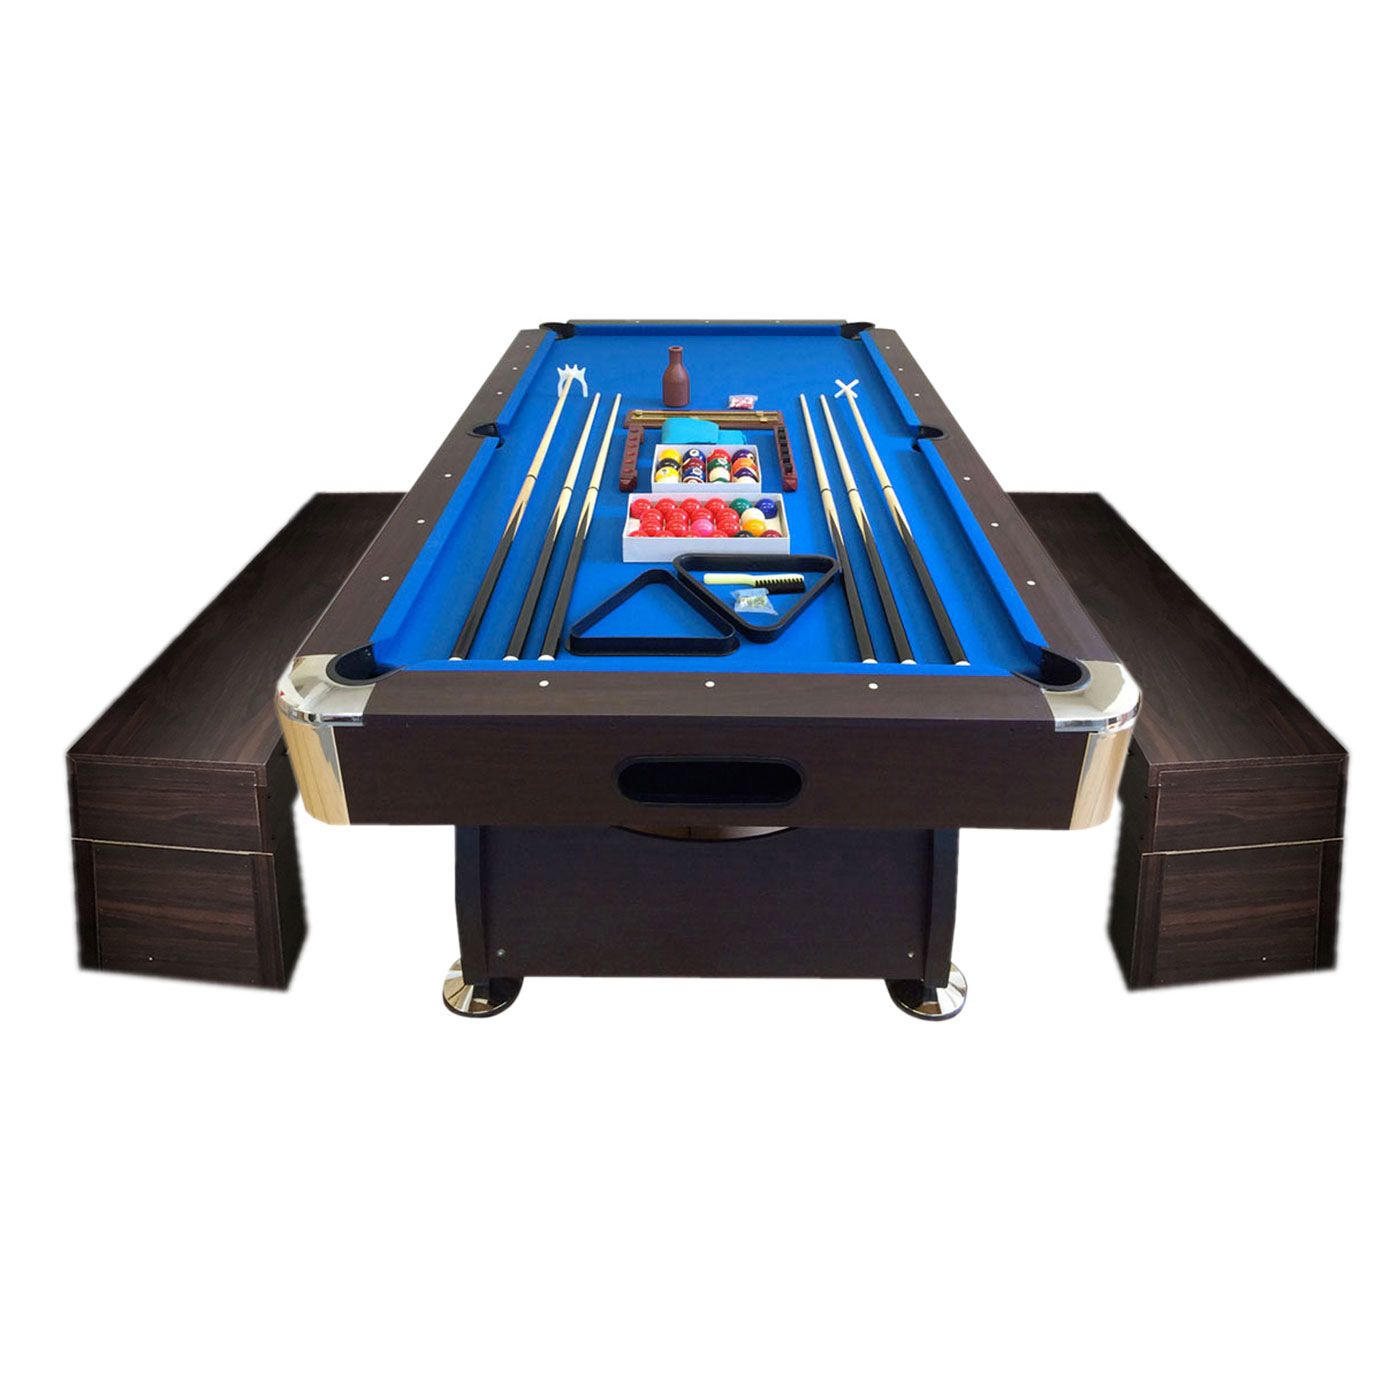 simba usa inc 8' Feet Billiard Pool Table Full Set Accessories Vintage Blue 8FT with benches